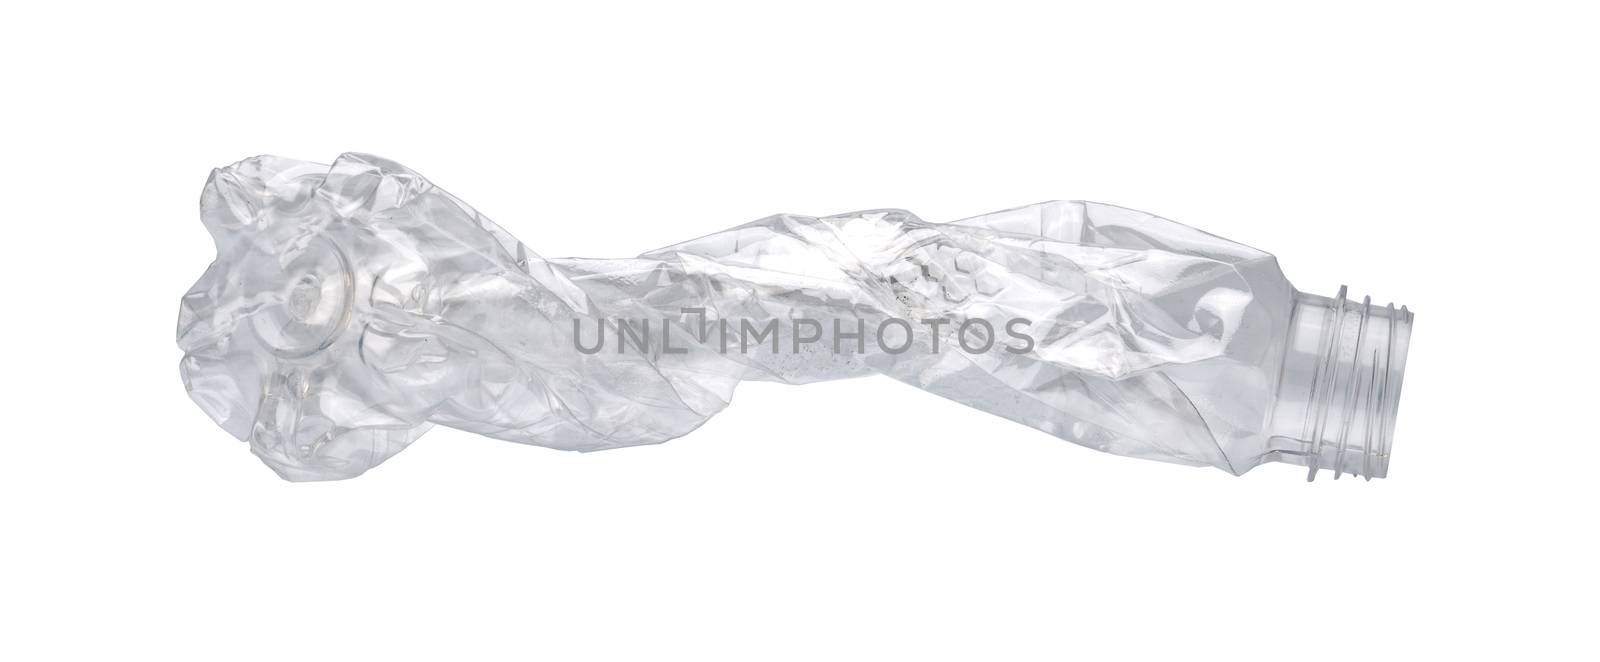 Waste of transparent plastic bottles that are twisted and deformed isolated on white background with copy space by Fahroni